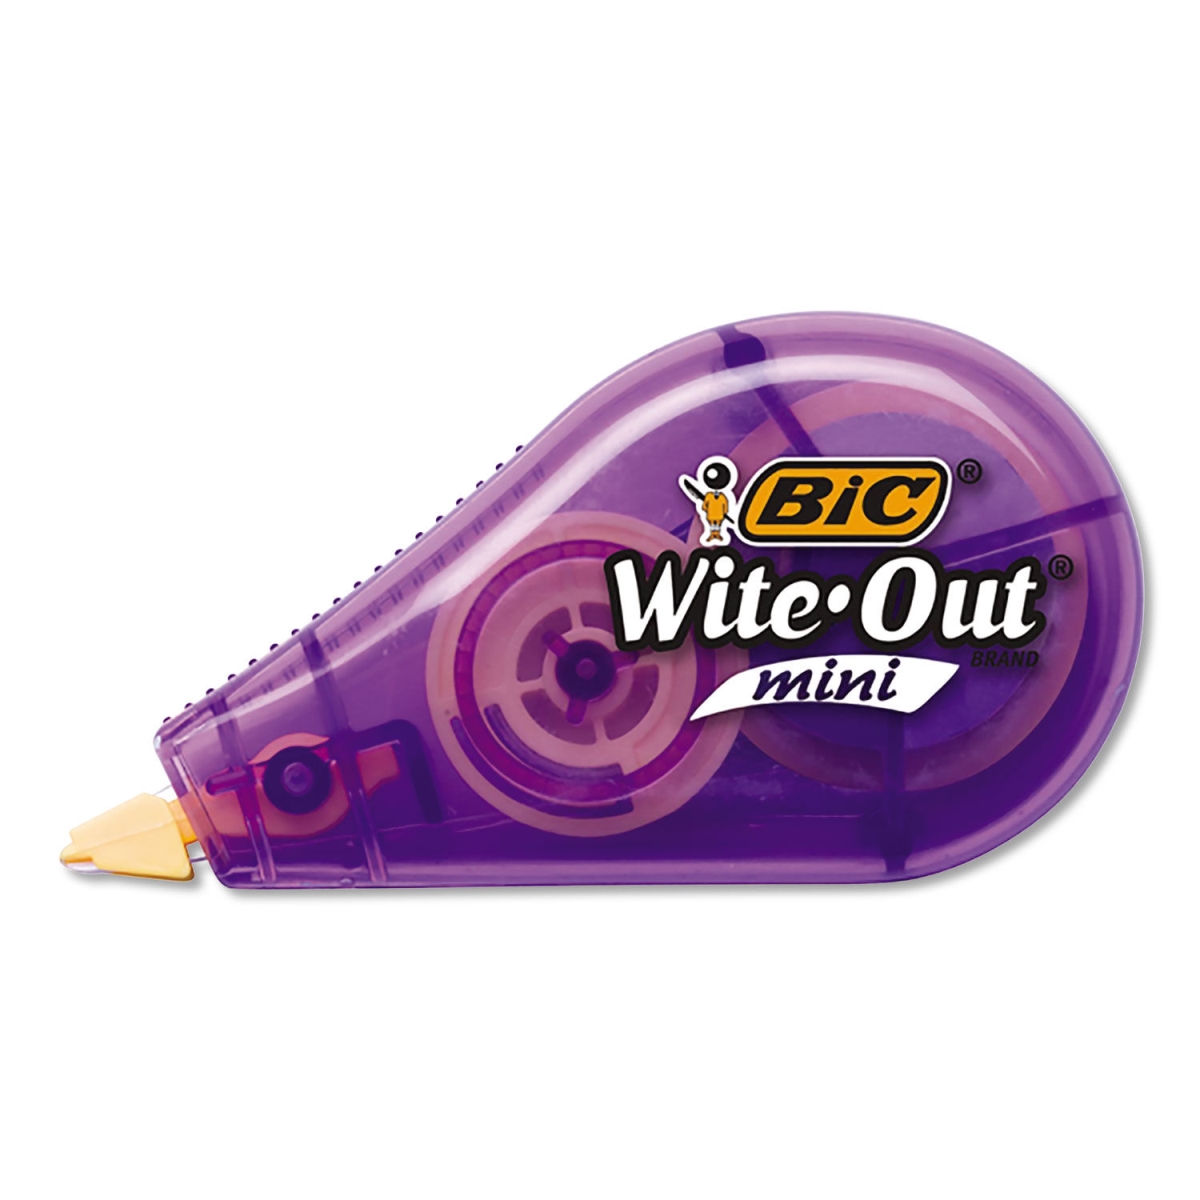 Wite-Out Mini Correction Tape Pack - 0.20" Width x 314.40 ft Length - 1 Line(s)Translucent Dispenser - Smooth, Compact, Ambidext